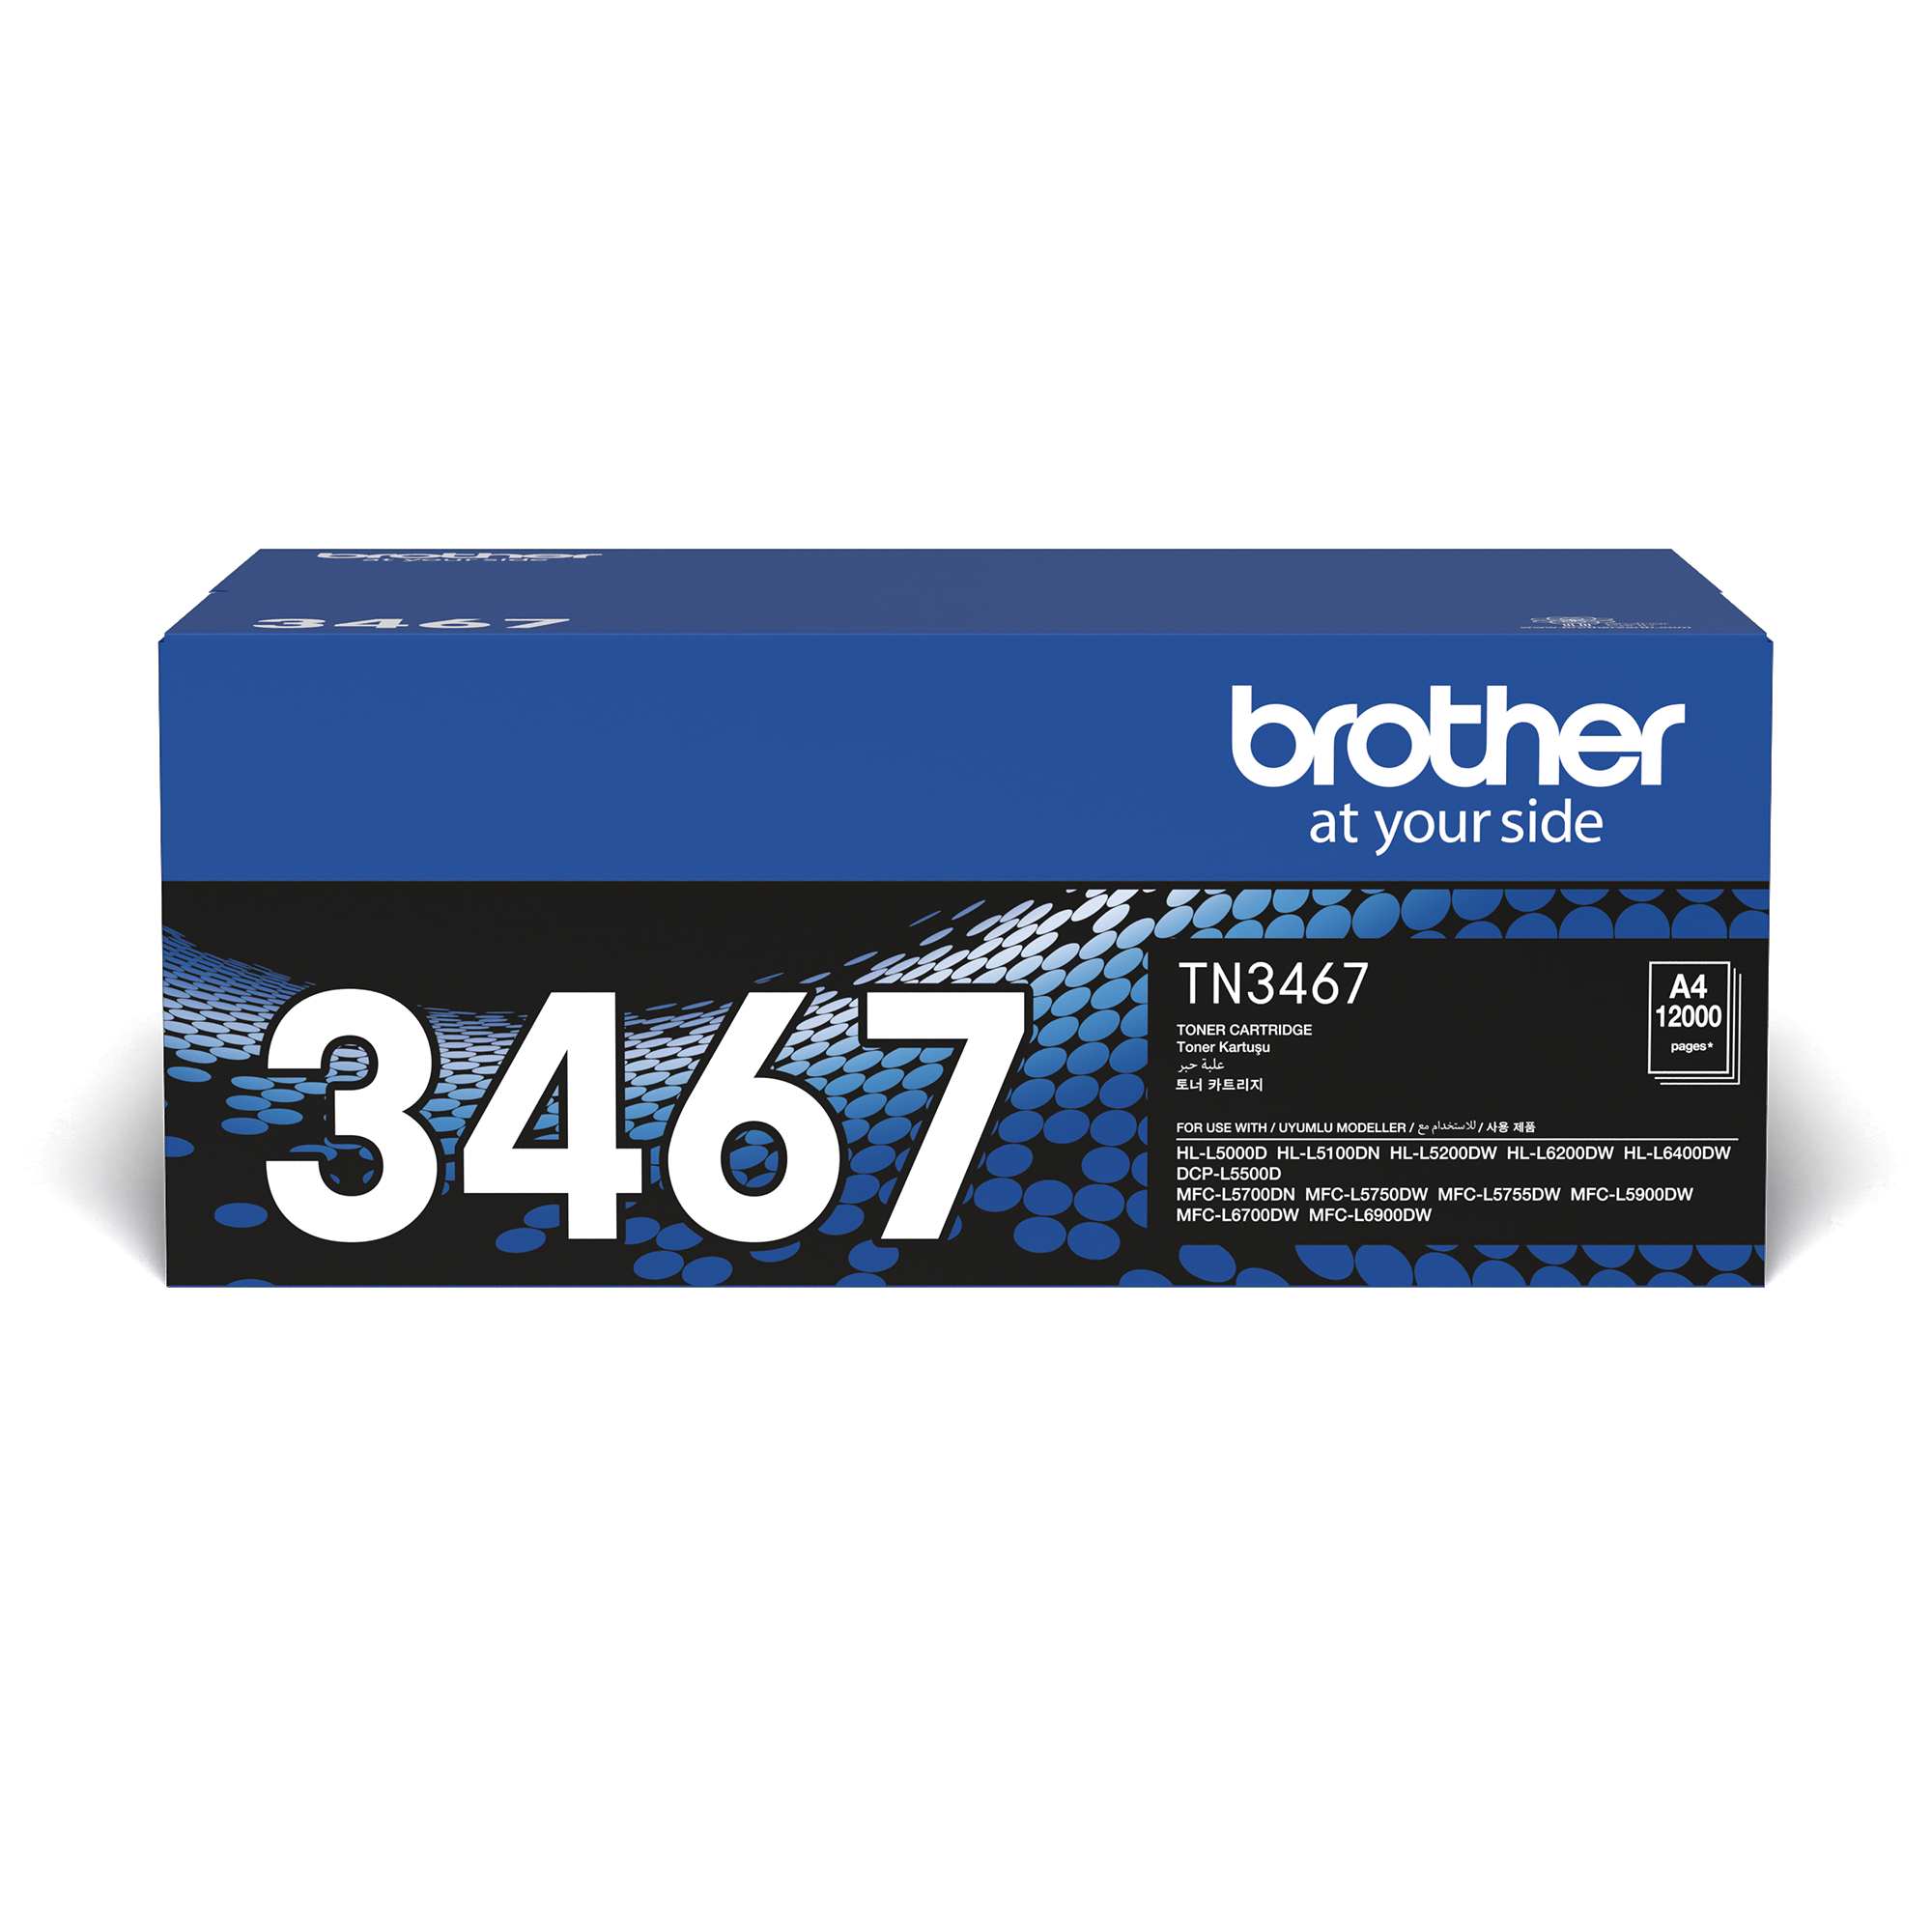 Brother TN-3467 Black Toner Cartridge (12,000 Pages)